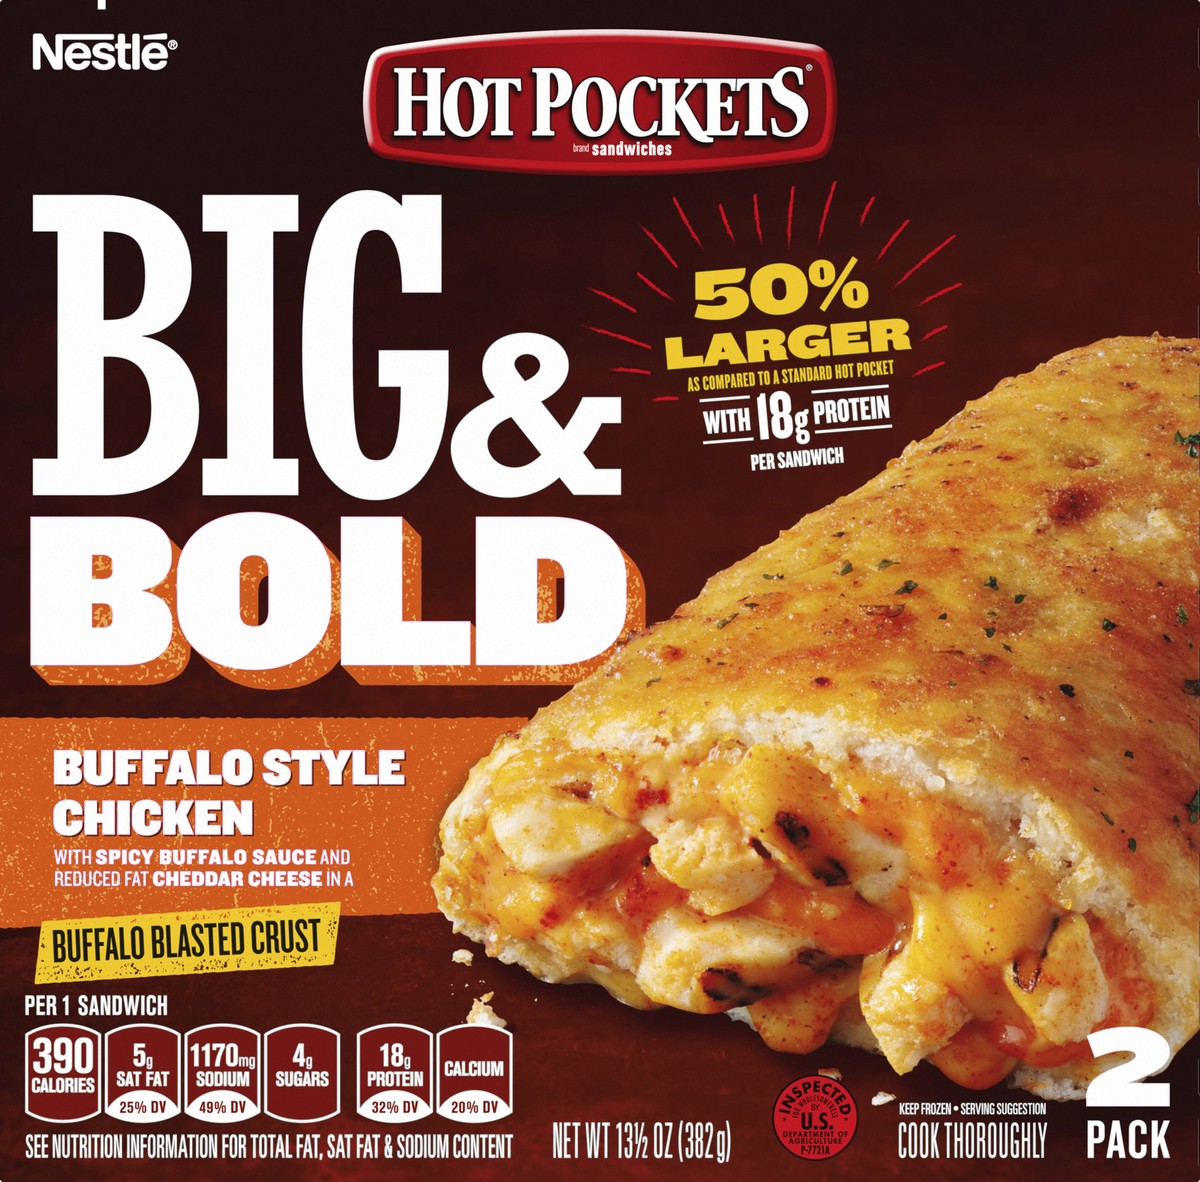 slide 5 of 8, Hot Pockets Big & Bold Buffalo Style Chicken Frozen Snacks, Frozen Buffalo Chicken Sandwiches with White Meat Chicken, 2 Count Microwave Snacks, 13.5 oz